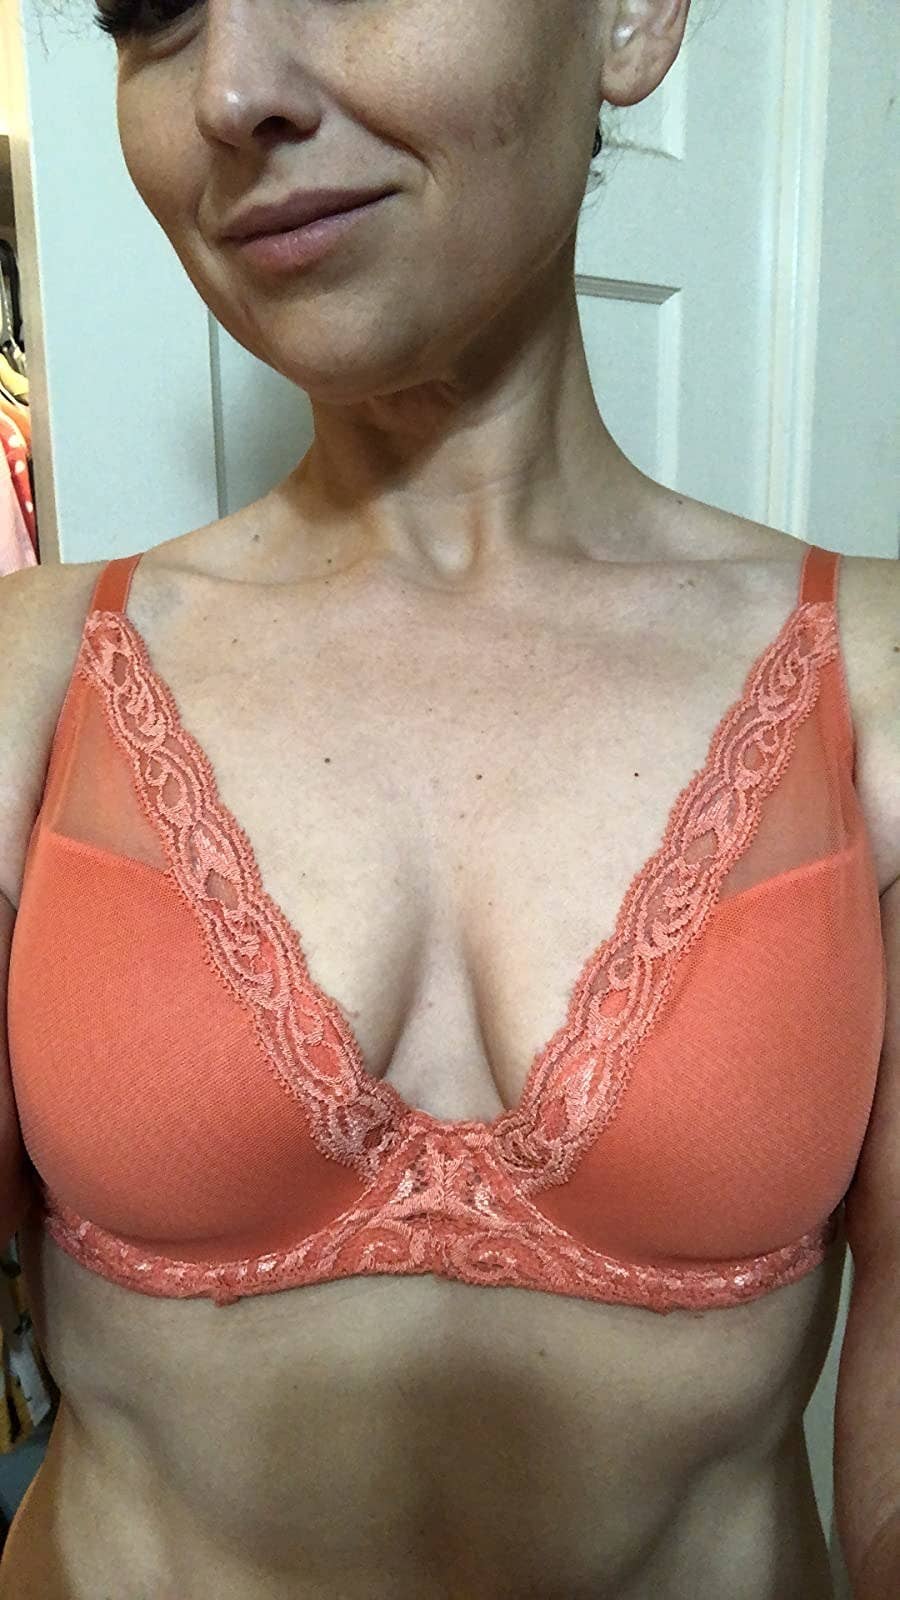 I have 32DDD boobs - I've found my new favorite bra with no